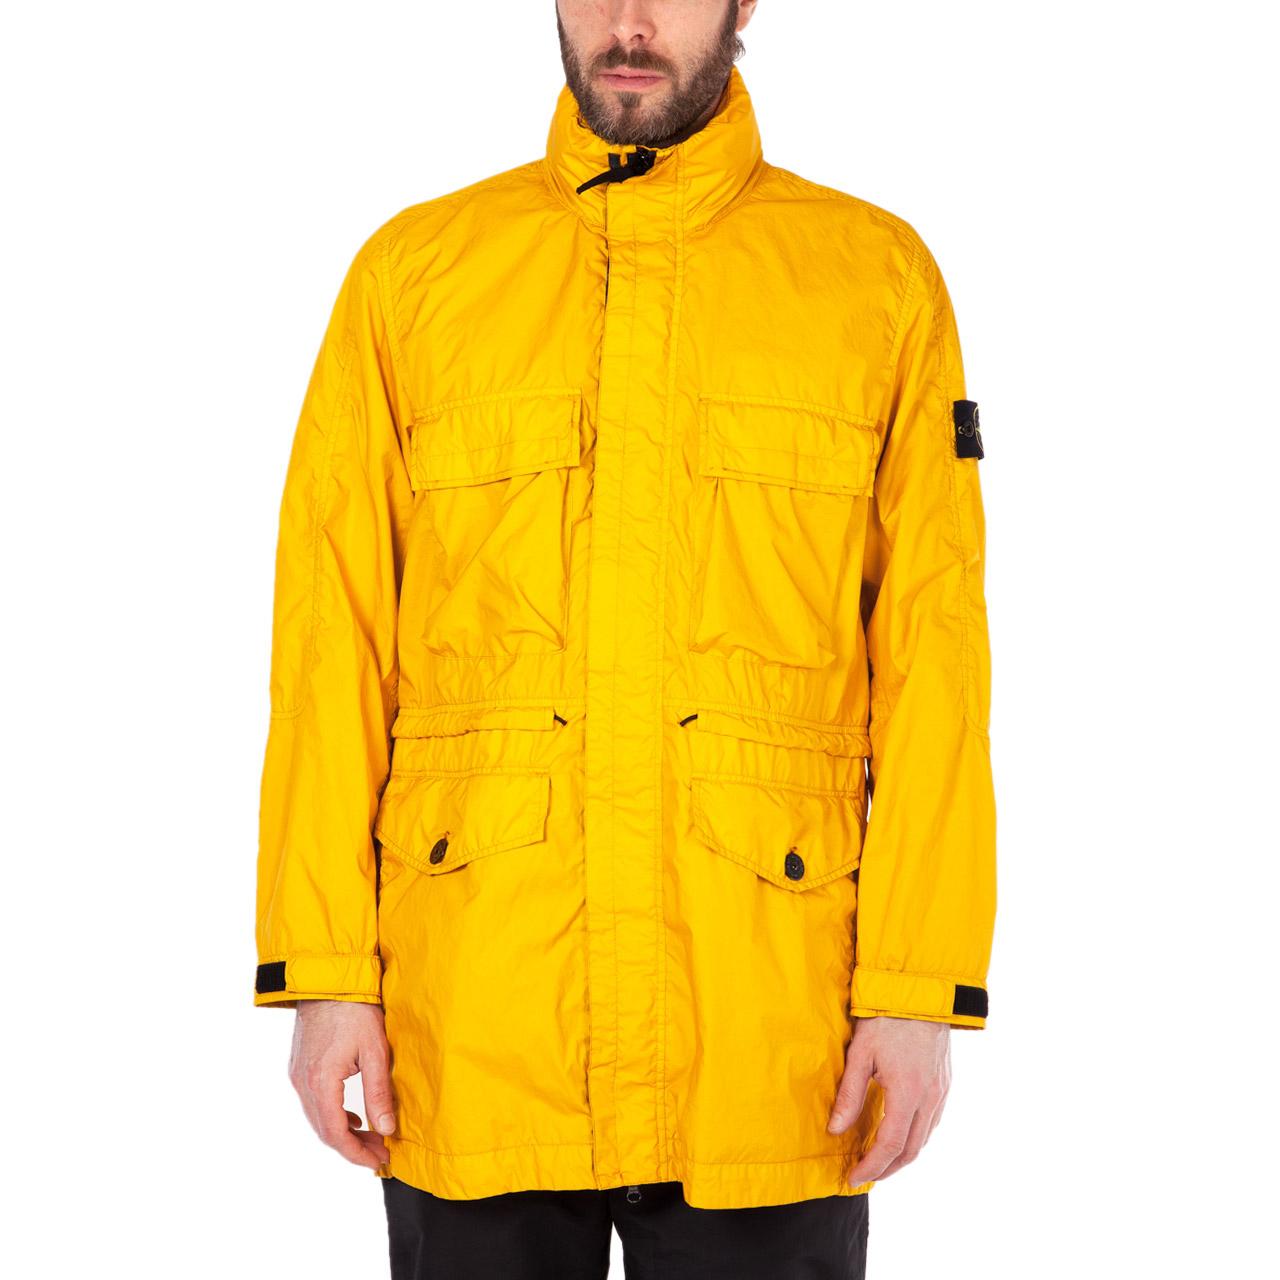 Stone Island Synthetic Membrana 3l Tc Jacket in Yellow for Men - Lyst